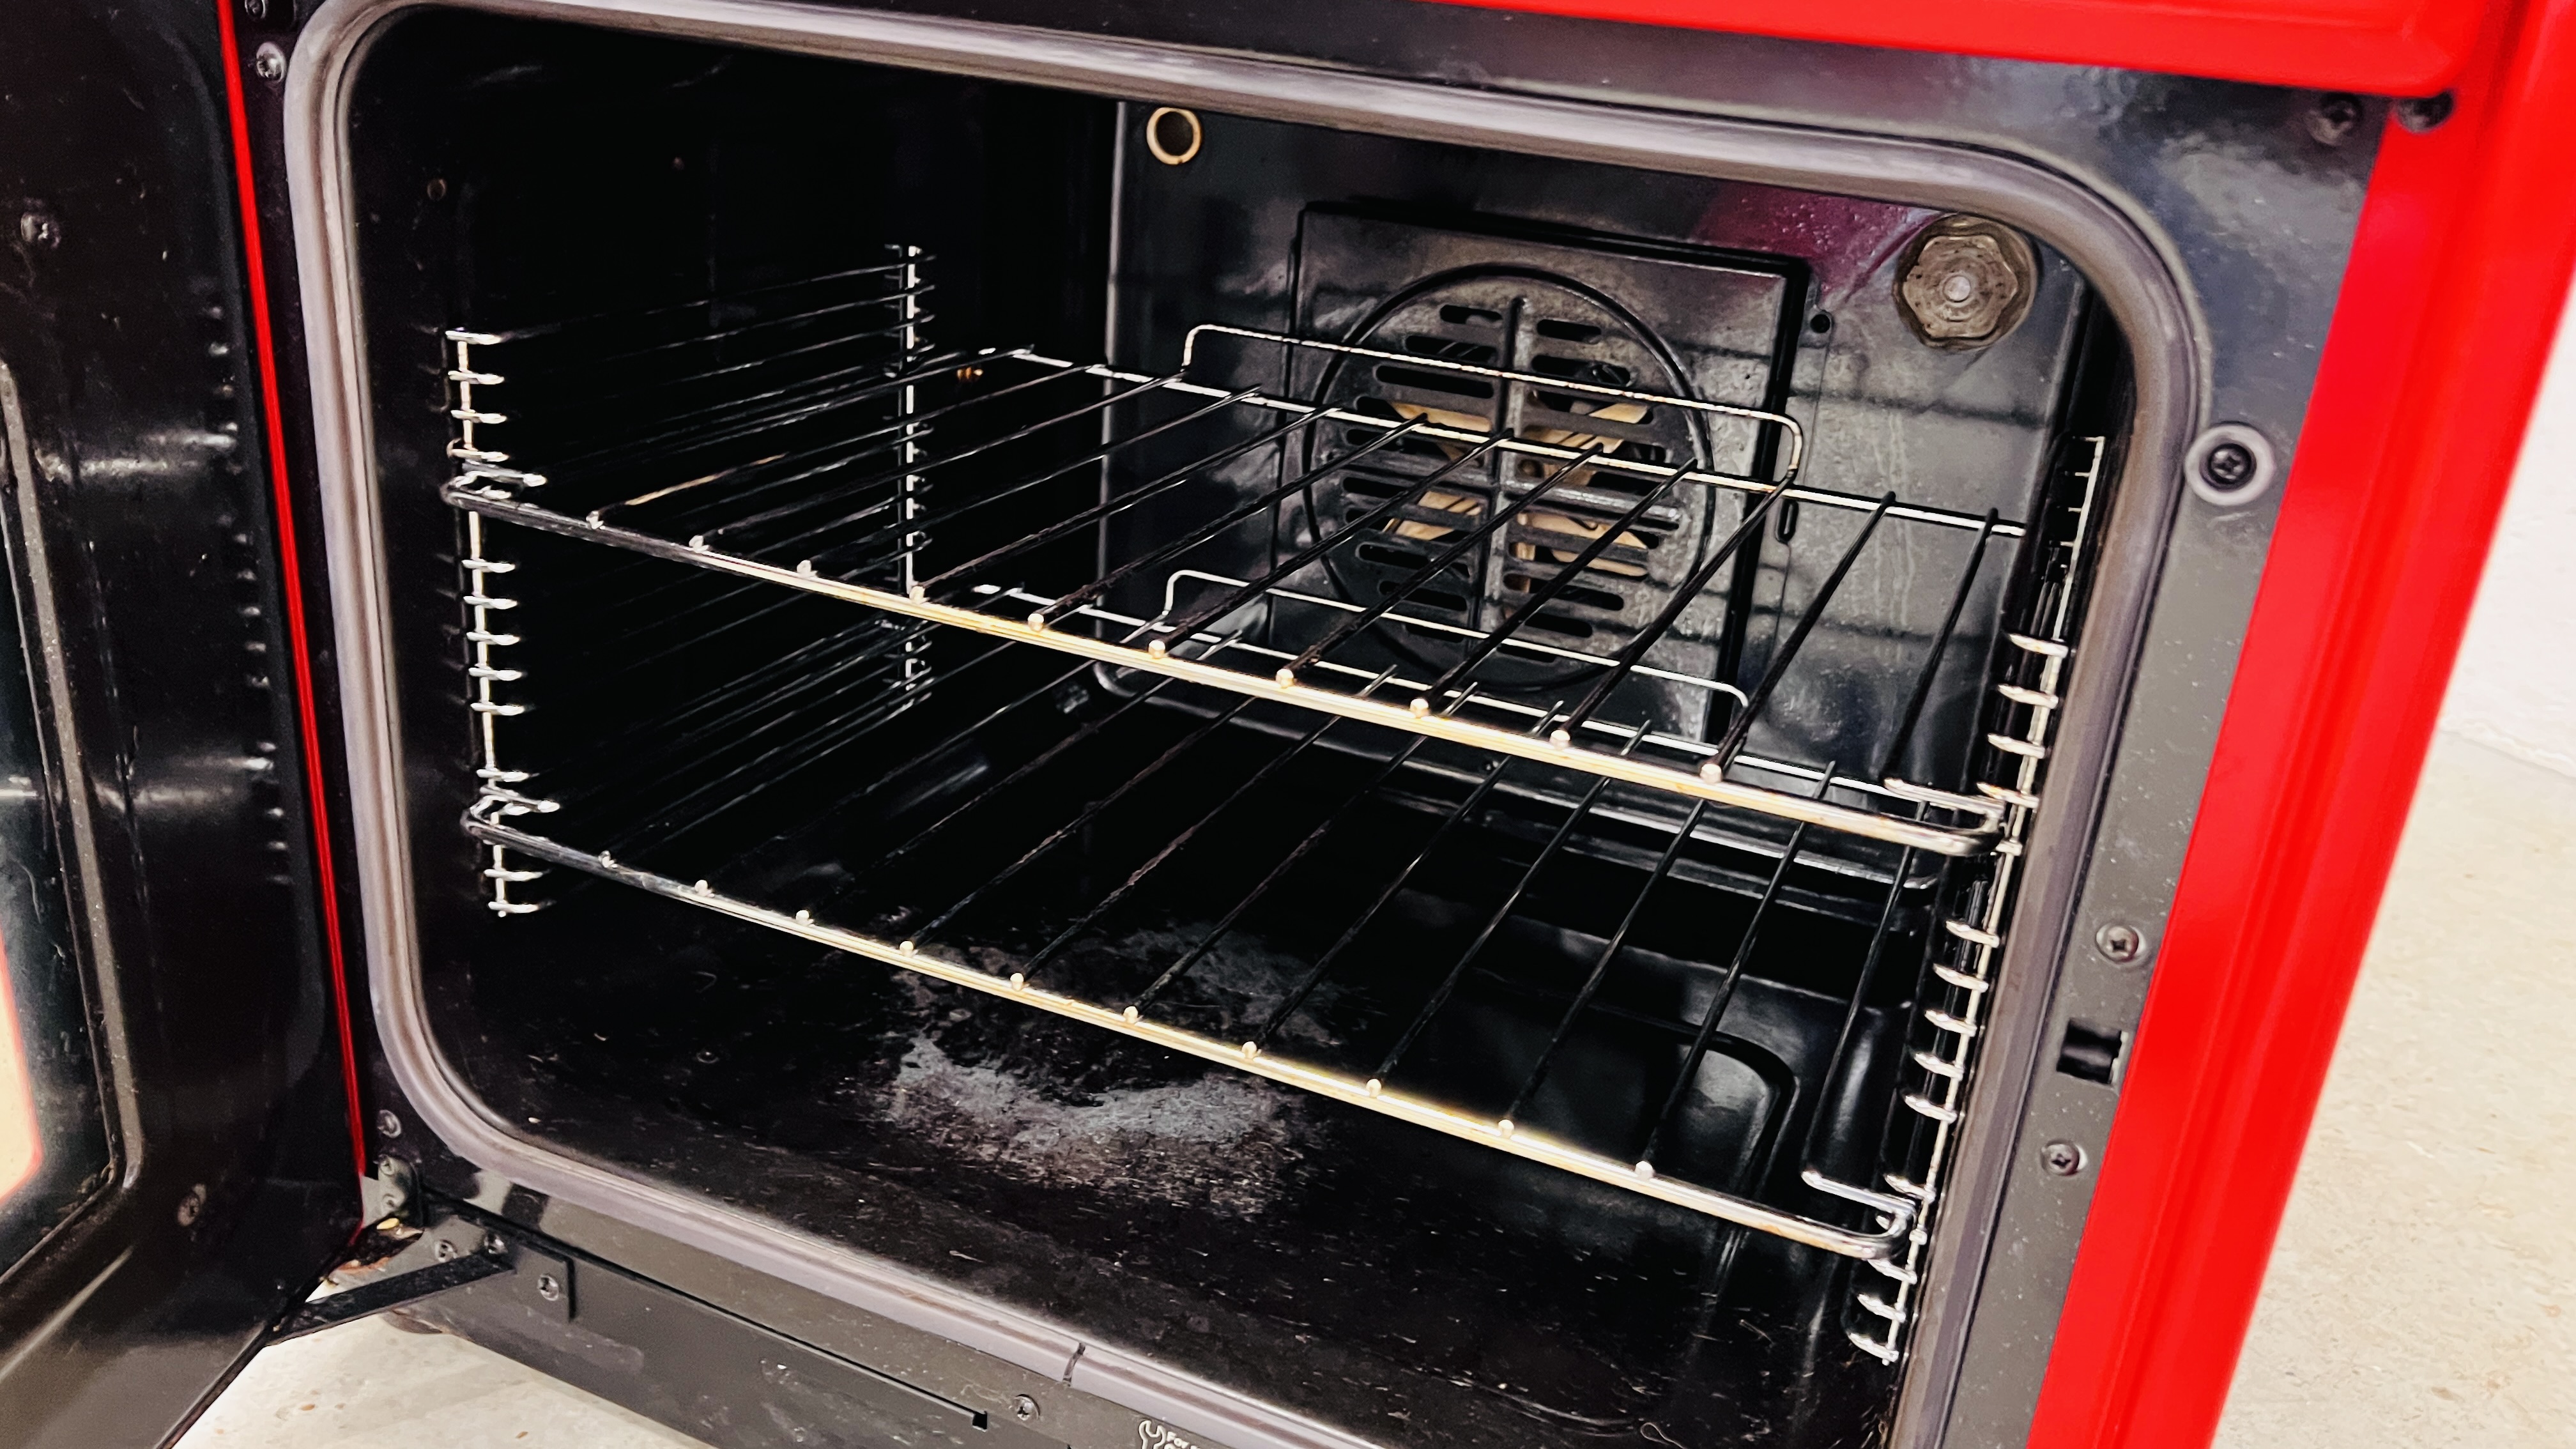 A BELLING "FARMHOUSE" MAINS GAS HOB, ELECTRIC SLOT IN COOKER FINISHED IN "HOT JALAPENO" RED, - Image 9 of 11